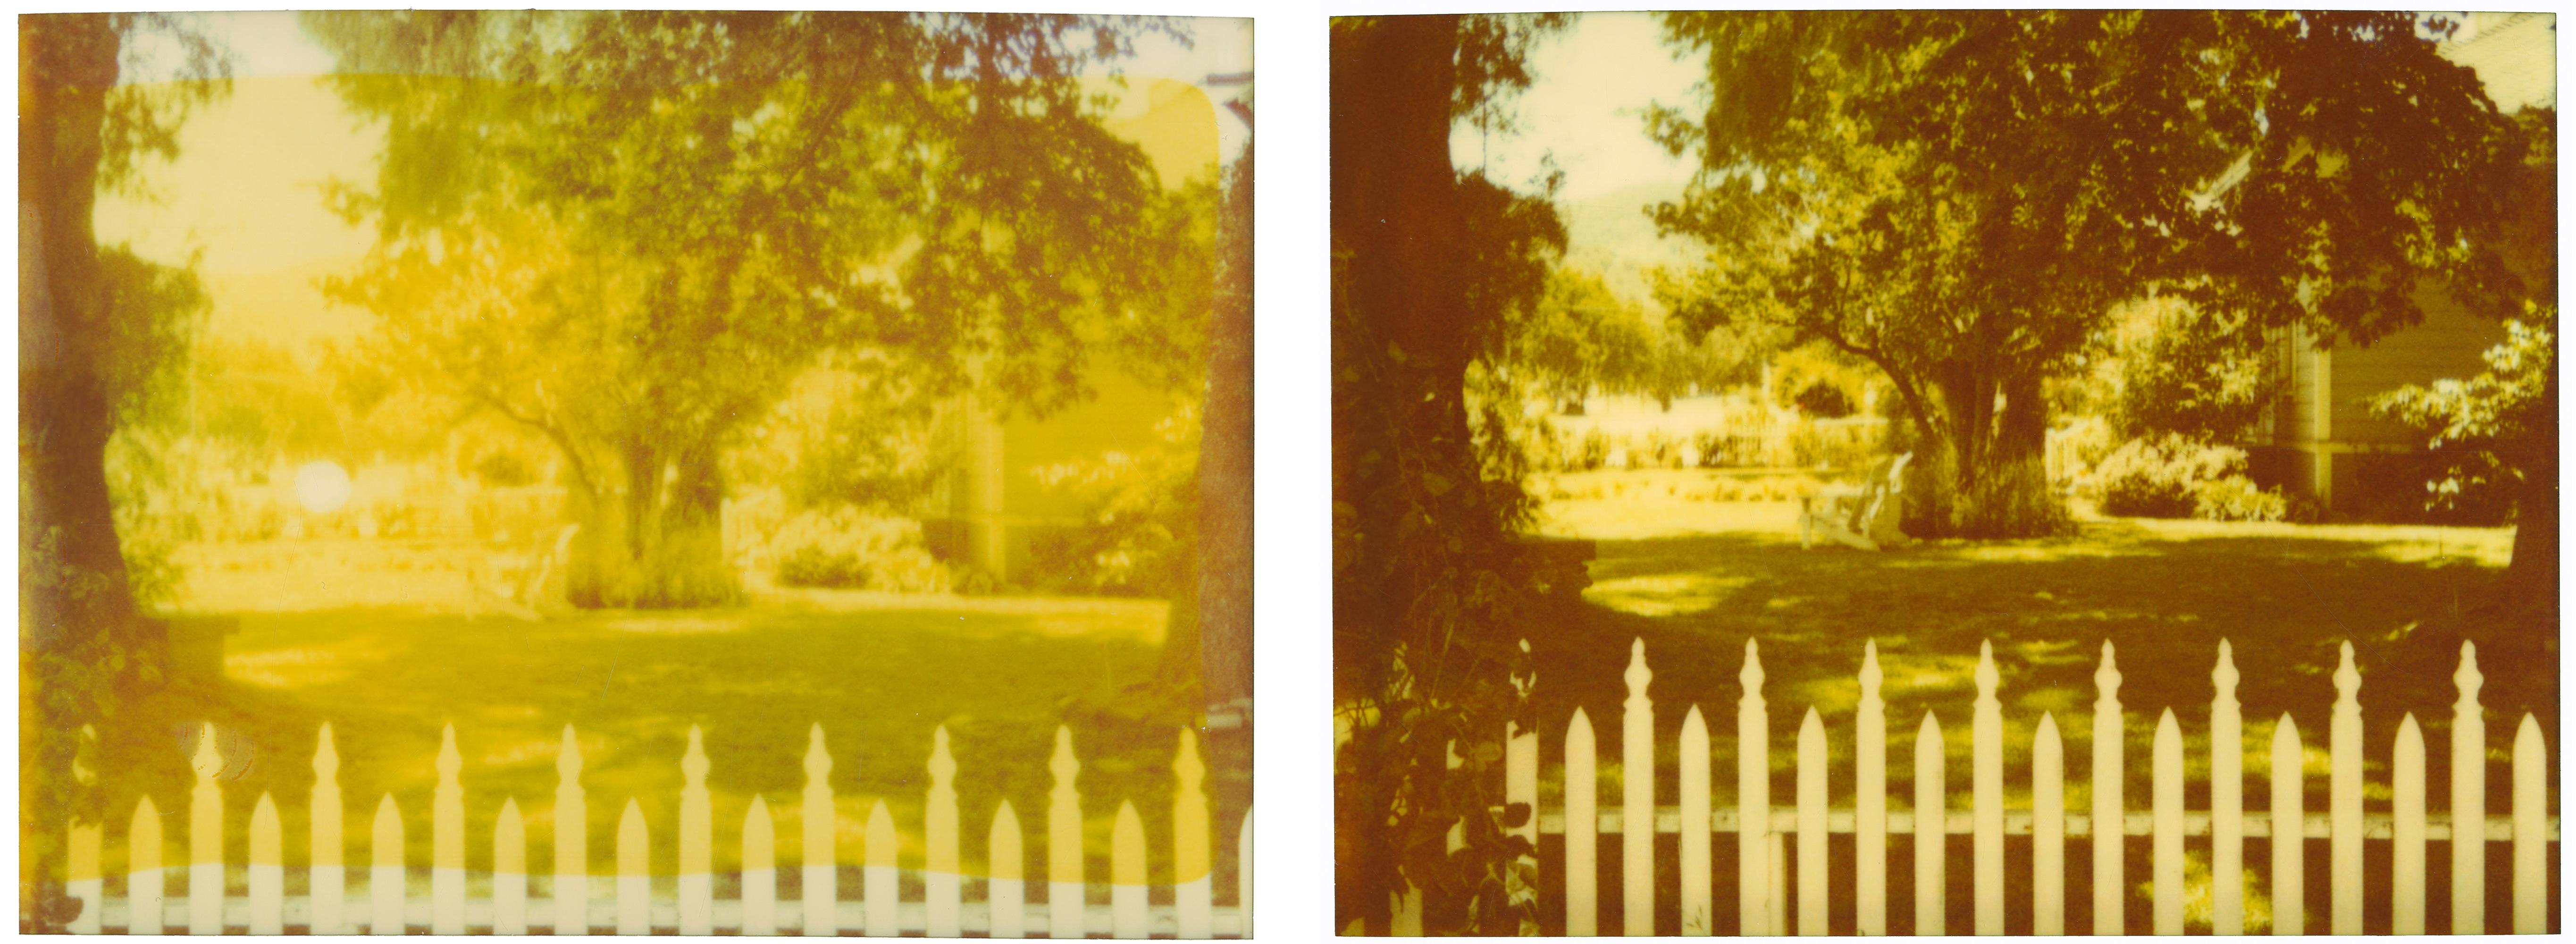 Stefanie Schneider Color Photograph - White Picket Fence (Suburbia), diptych, analog, mounted